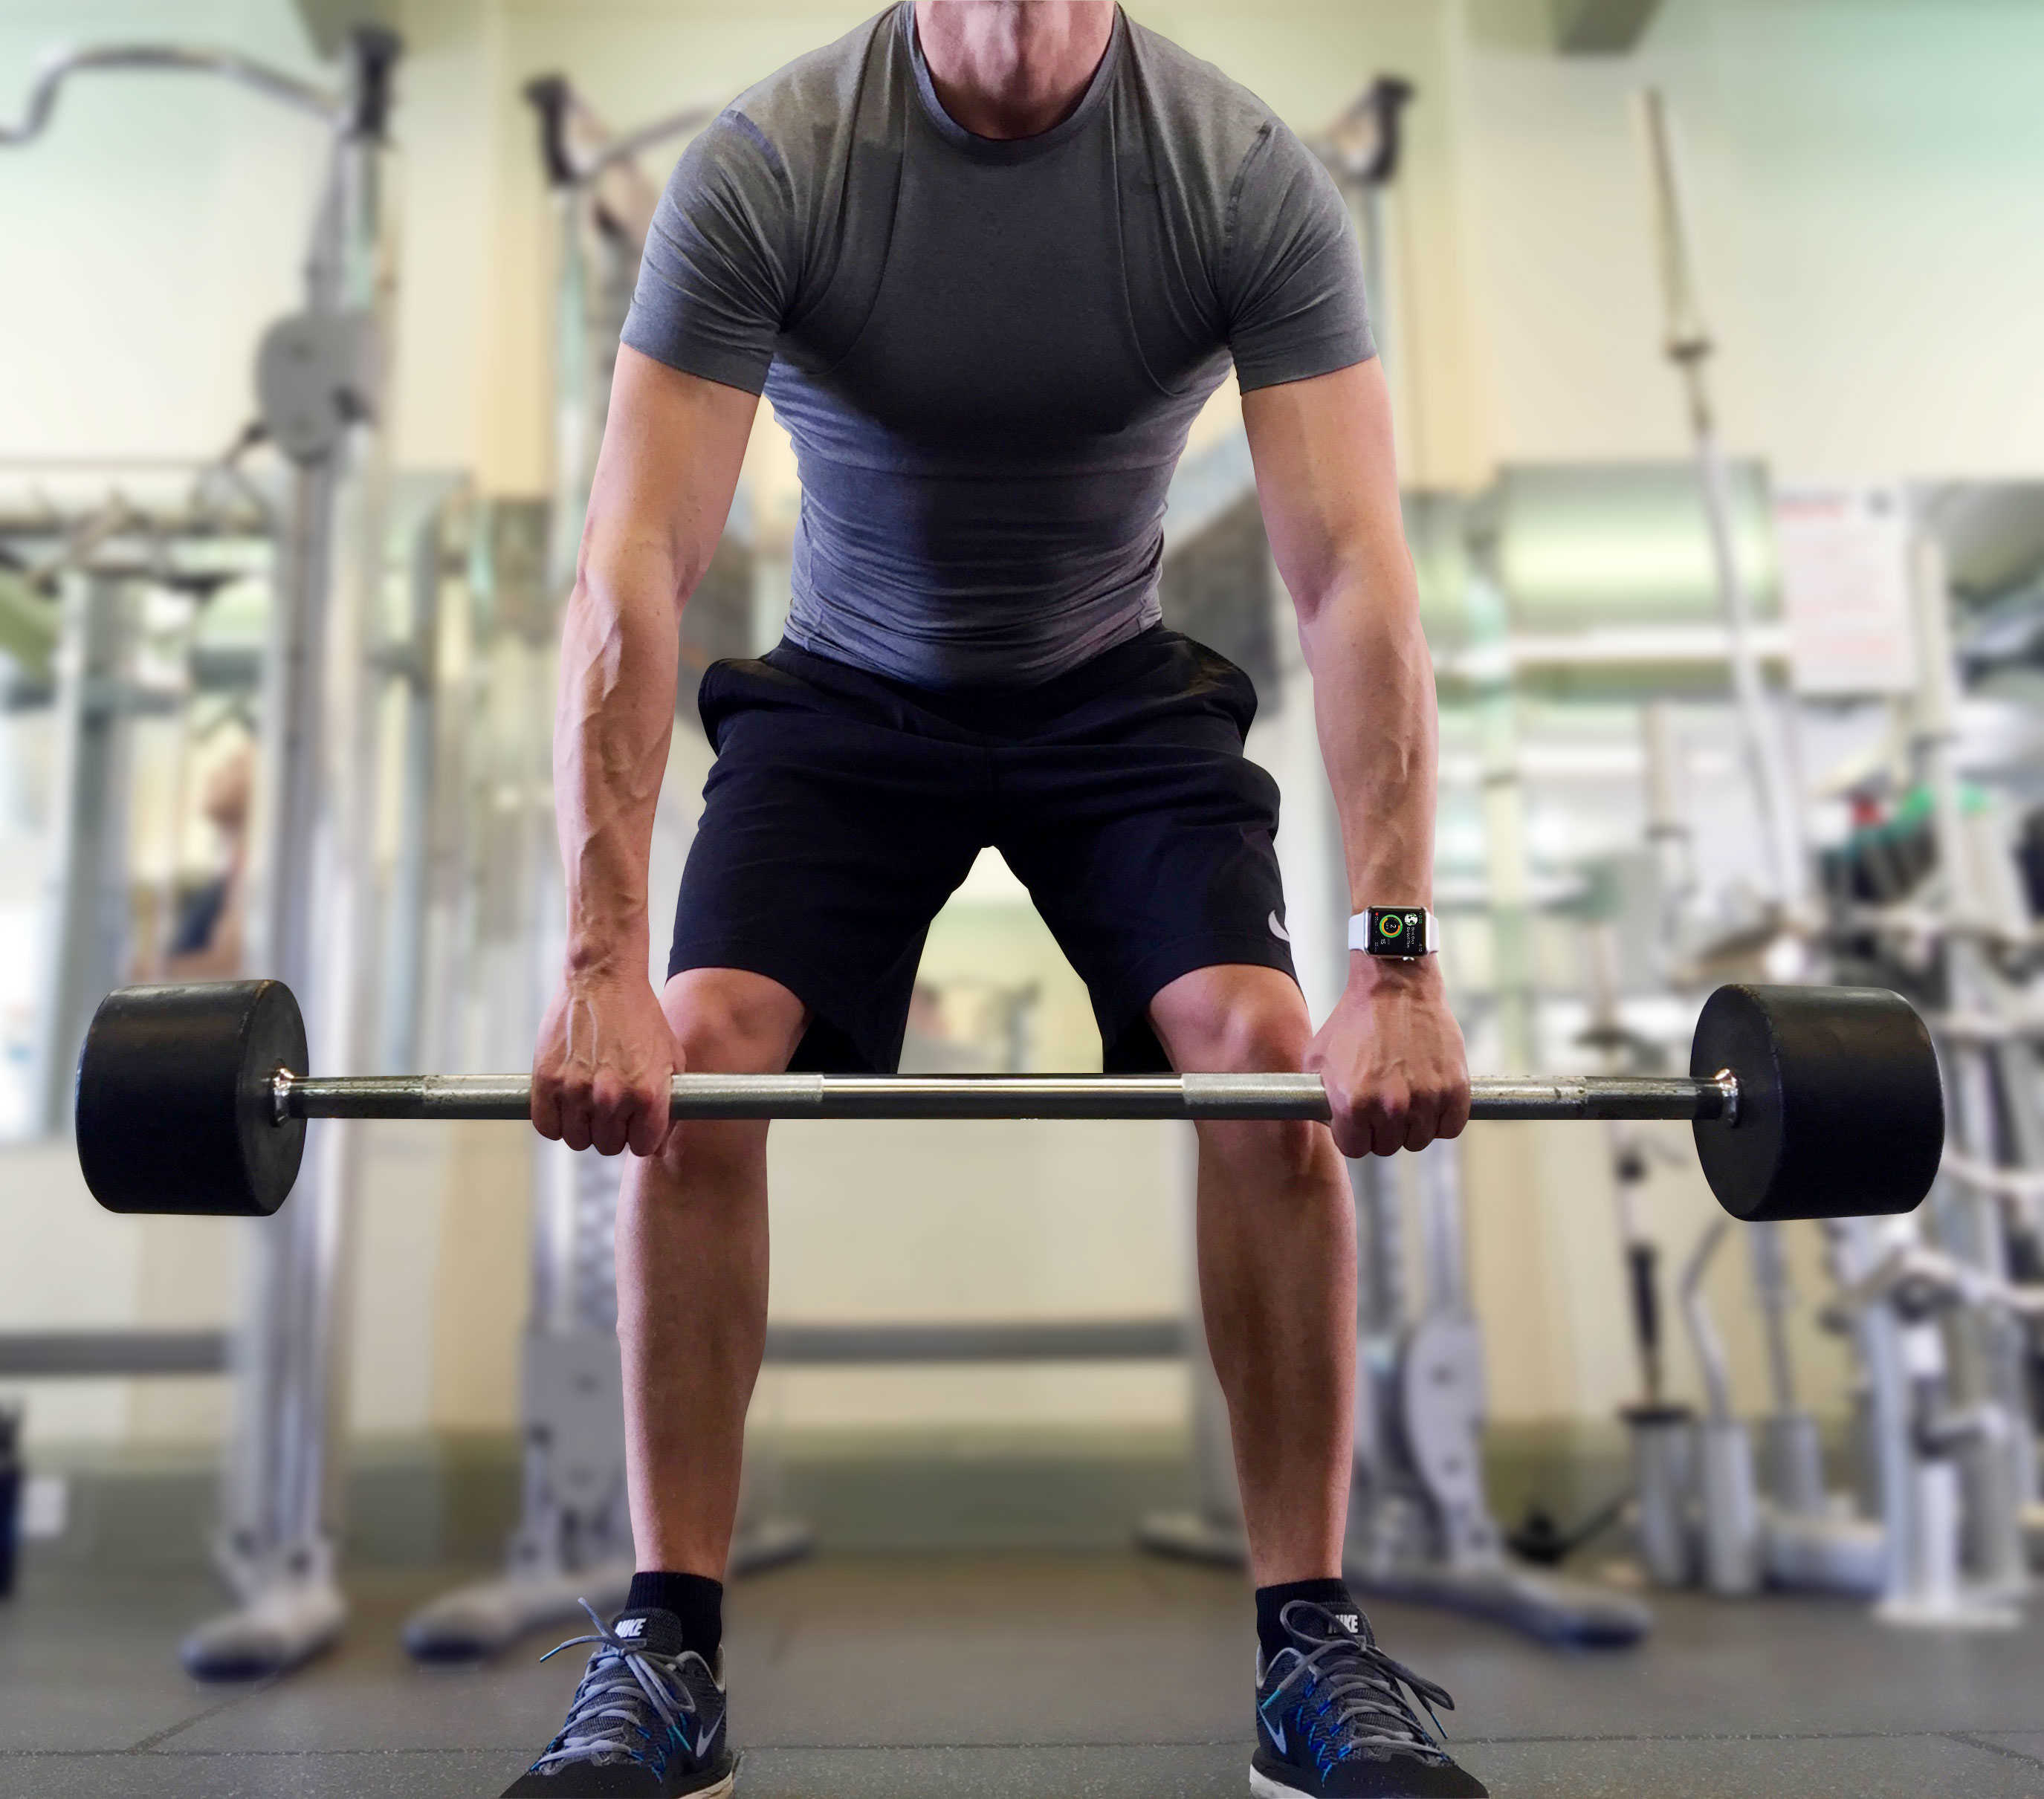 StrongLifts 5x5 focuses on five essential barbell exercises Strength training is not Apple Watch’s strong point